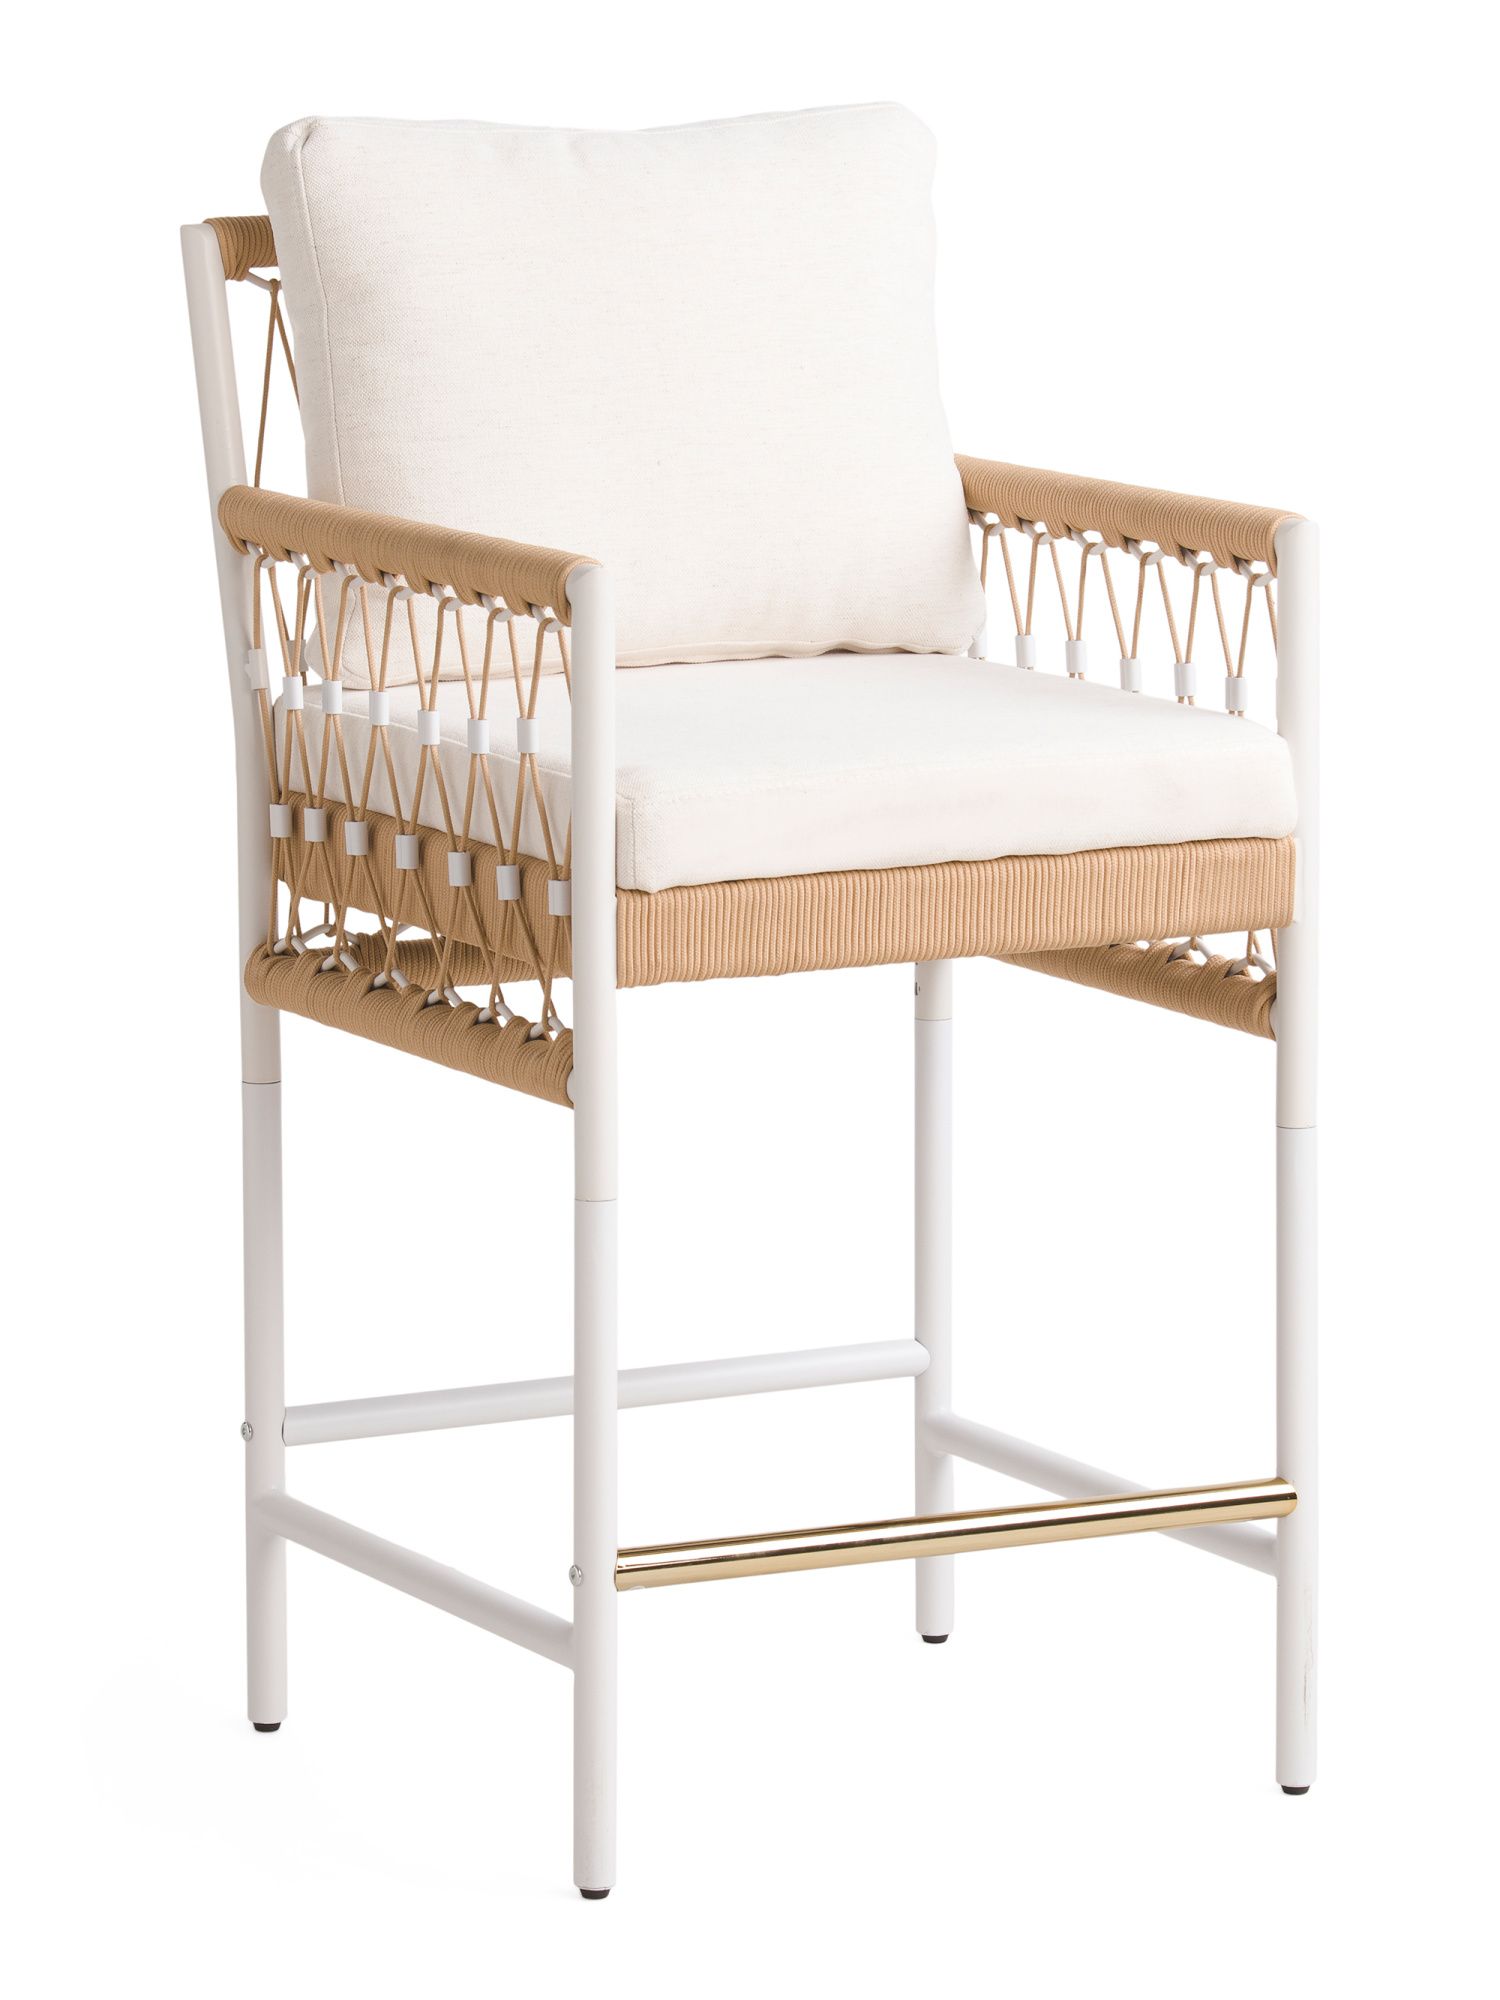 Counter Stool With Rope Detailing | Chairs & Seating | Marshalls | Marshalls